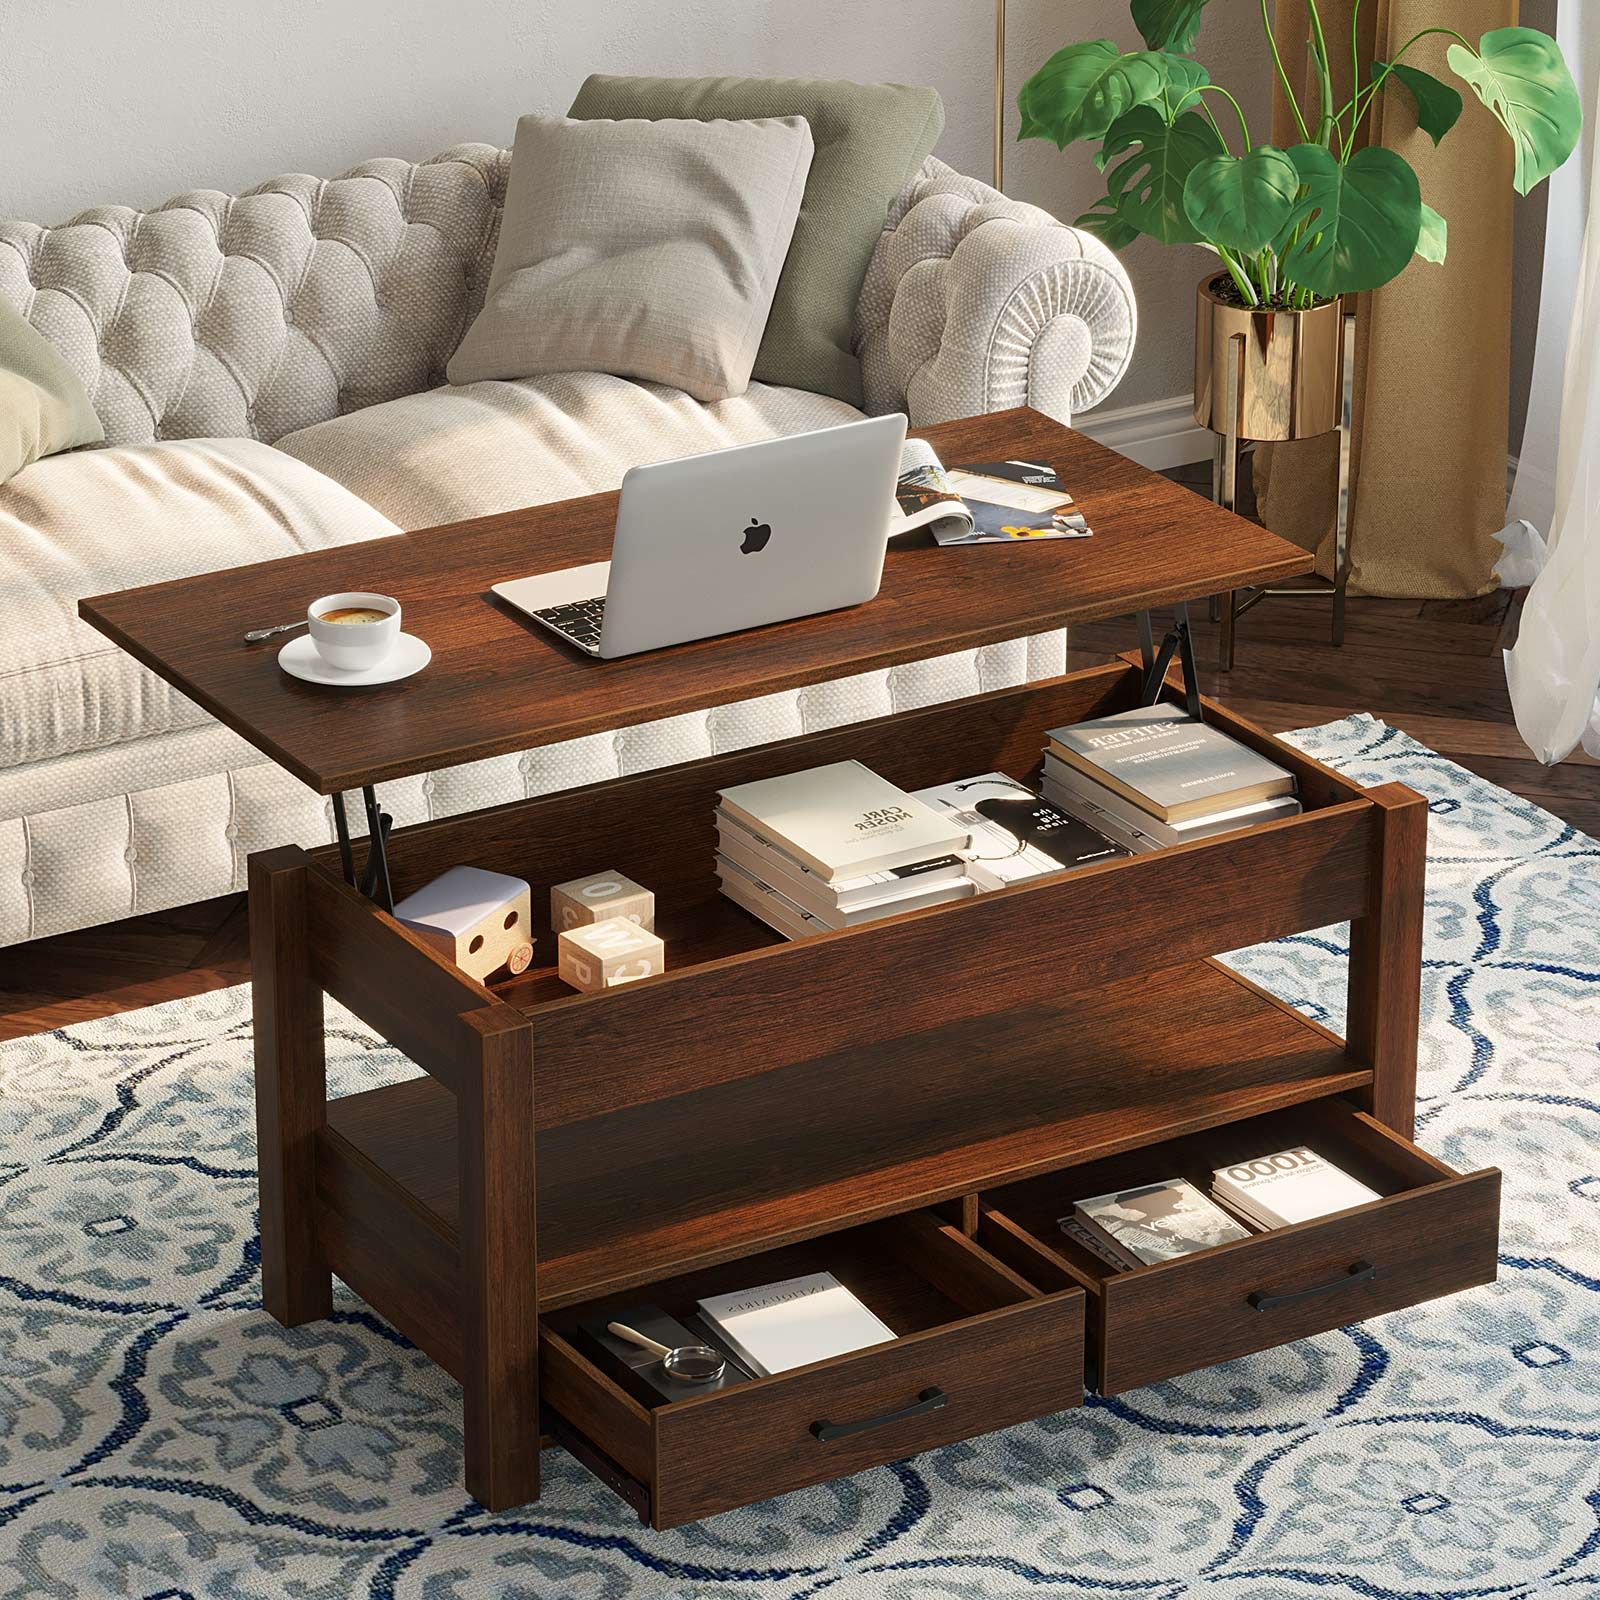 Trendy Rolanstar Coffee Table, Lift Top Coffee Table With Drawers And Hidden Intended For Lift Top Coffee Tables With Shelves (View 15 of 15)